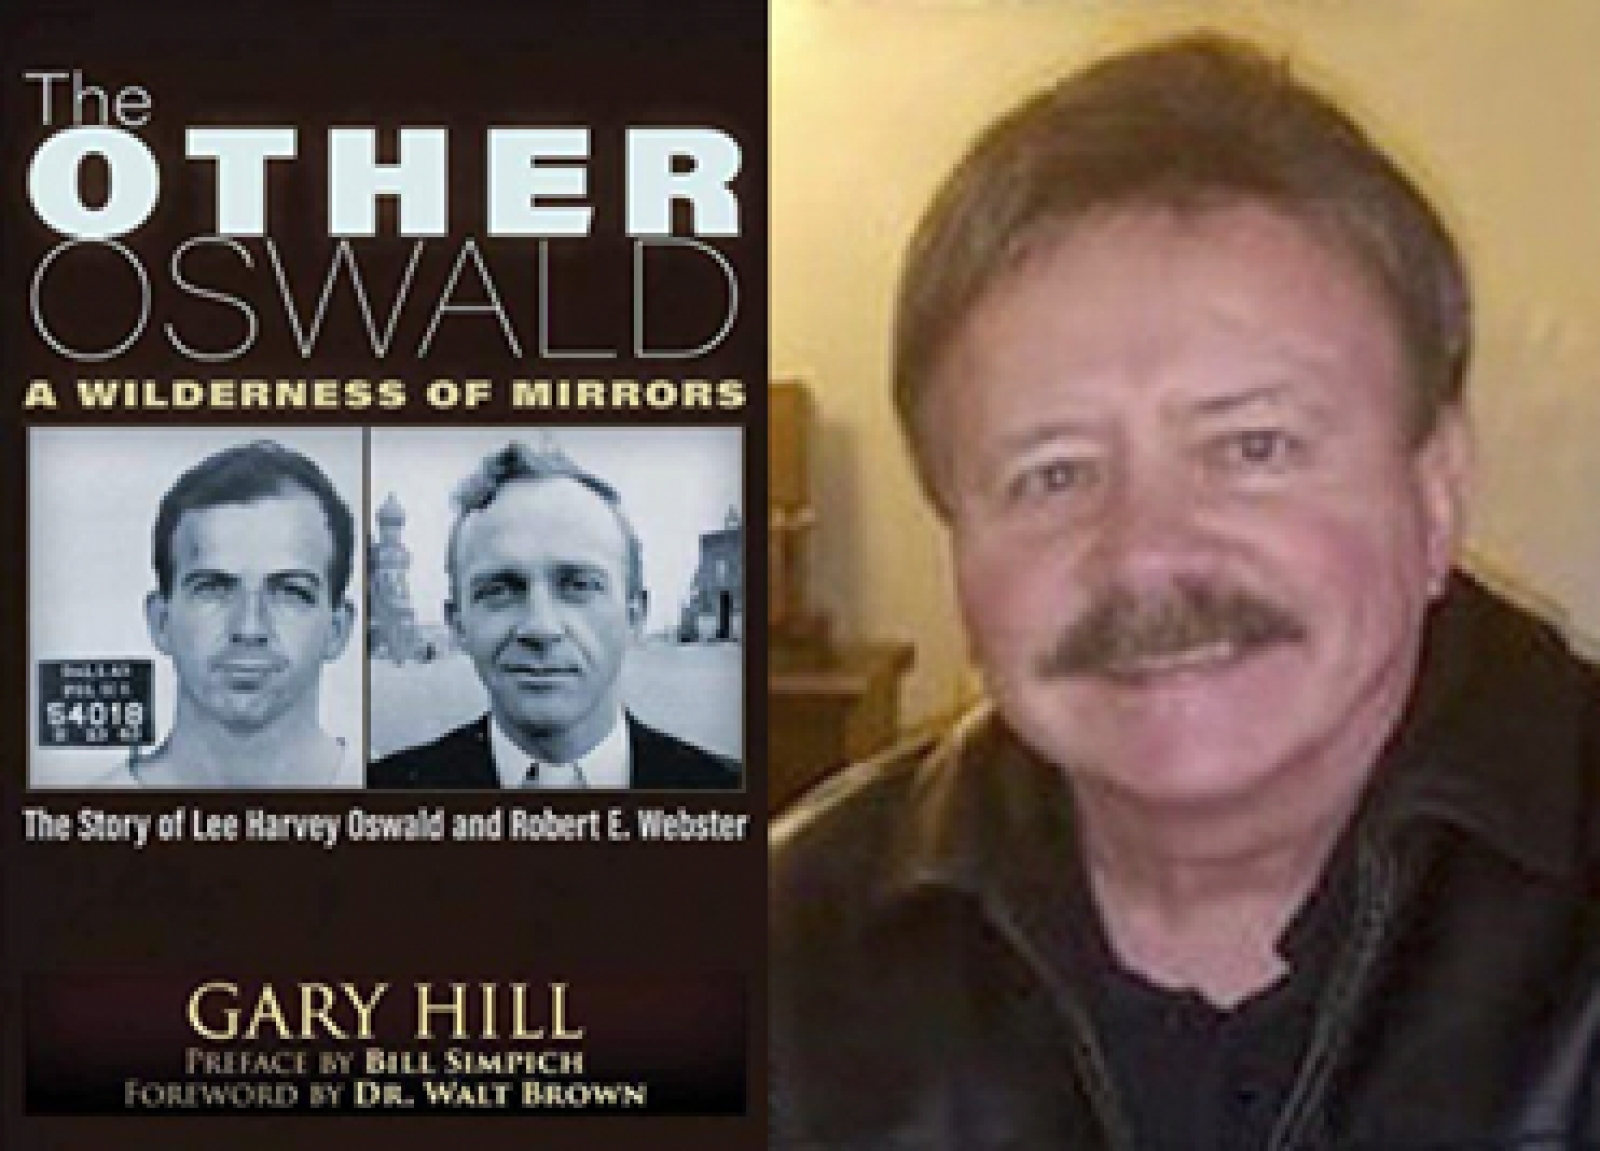 Gary Hill’s The Other Oswald:  A Wilderness of Mirrors